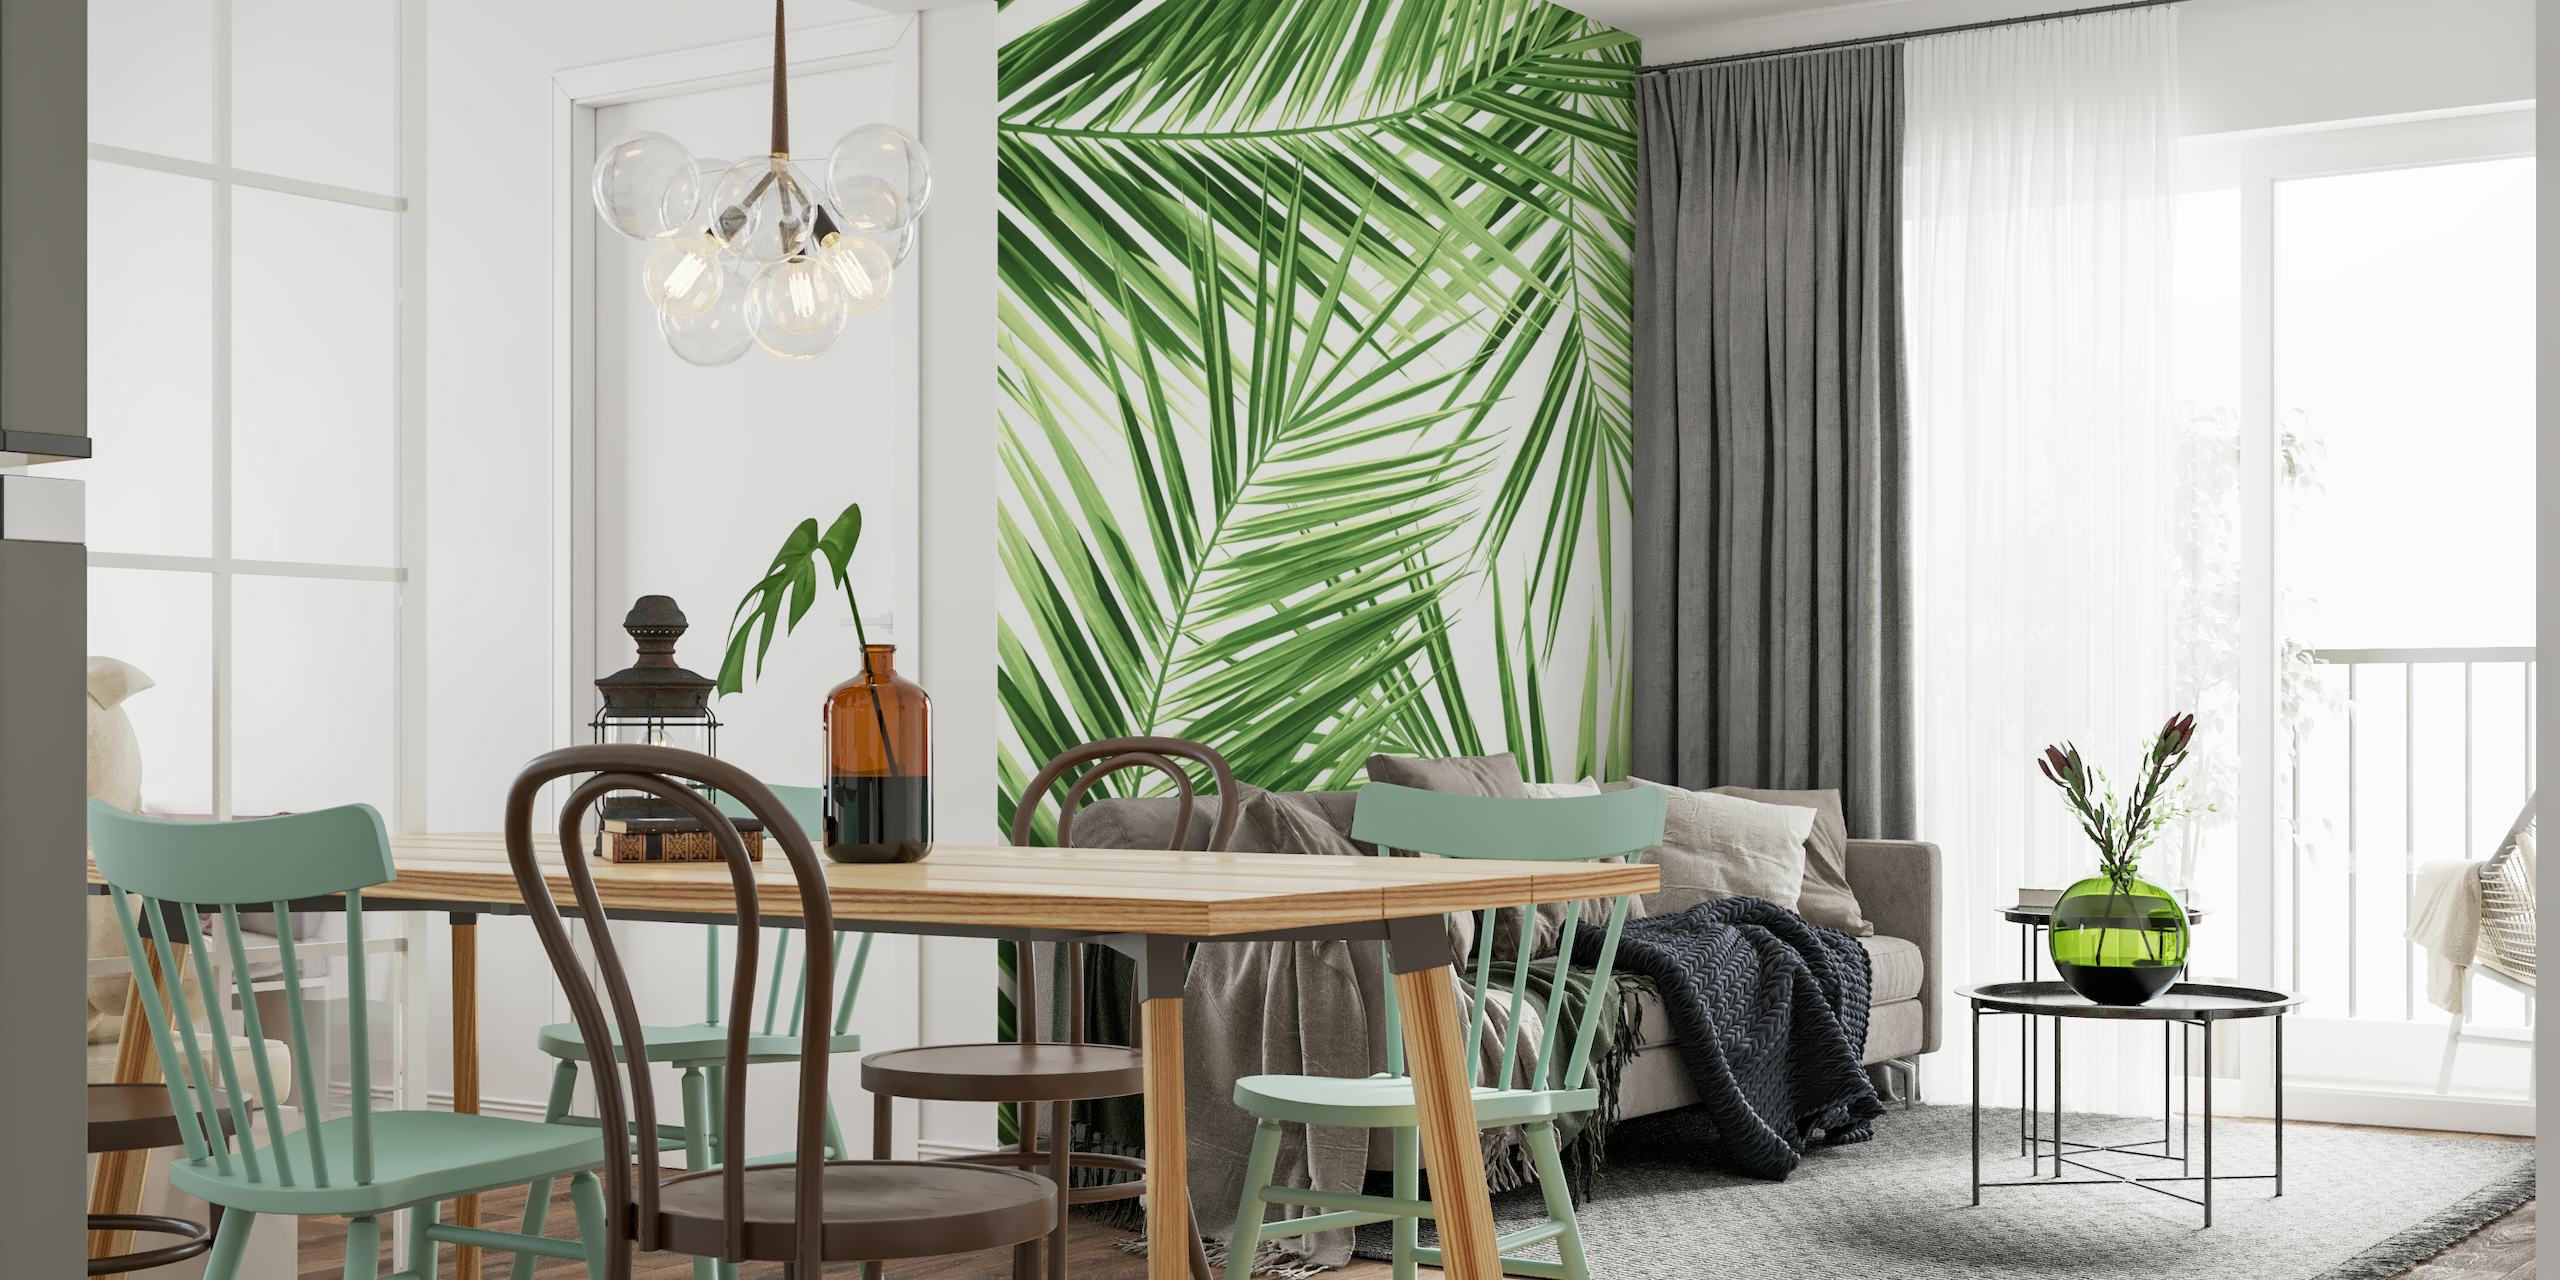 Green palm leaf pattern wall mural for a tropical-themed decor